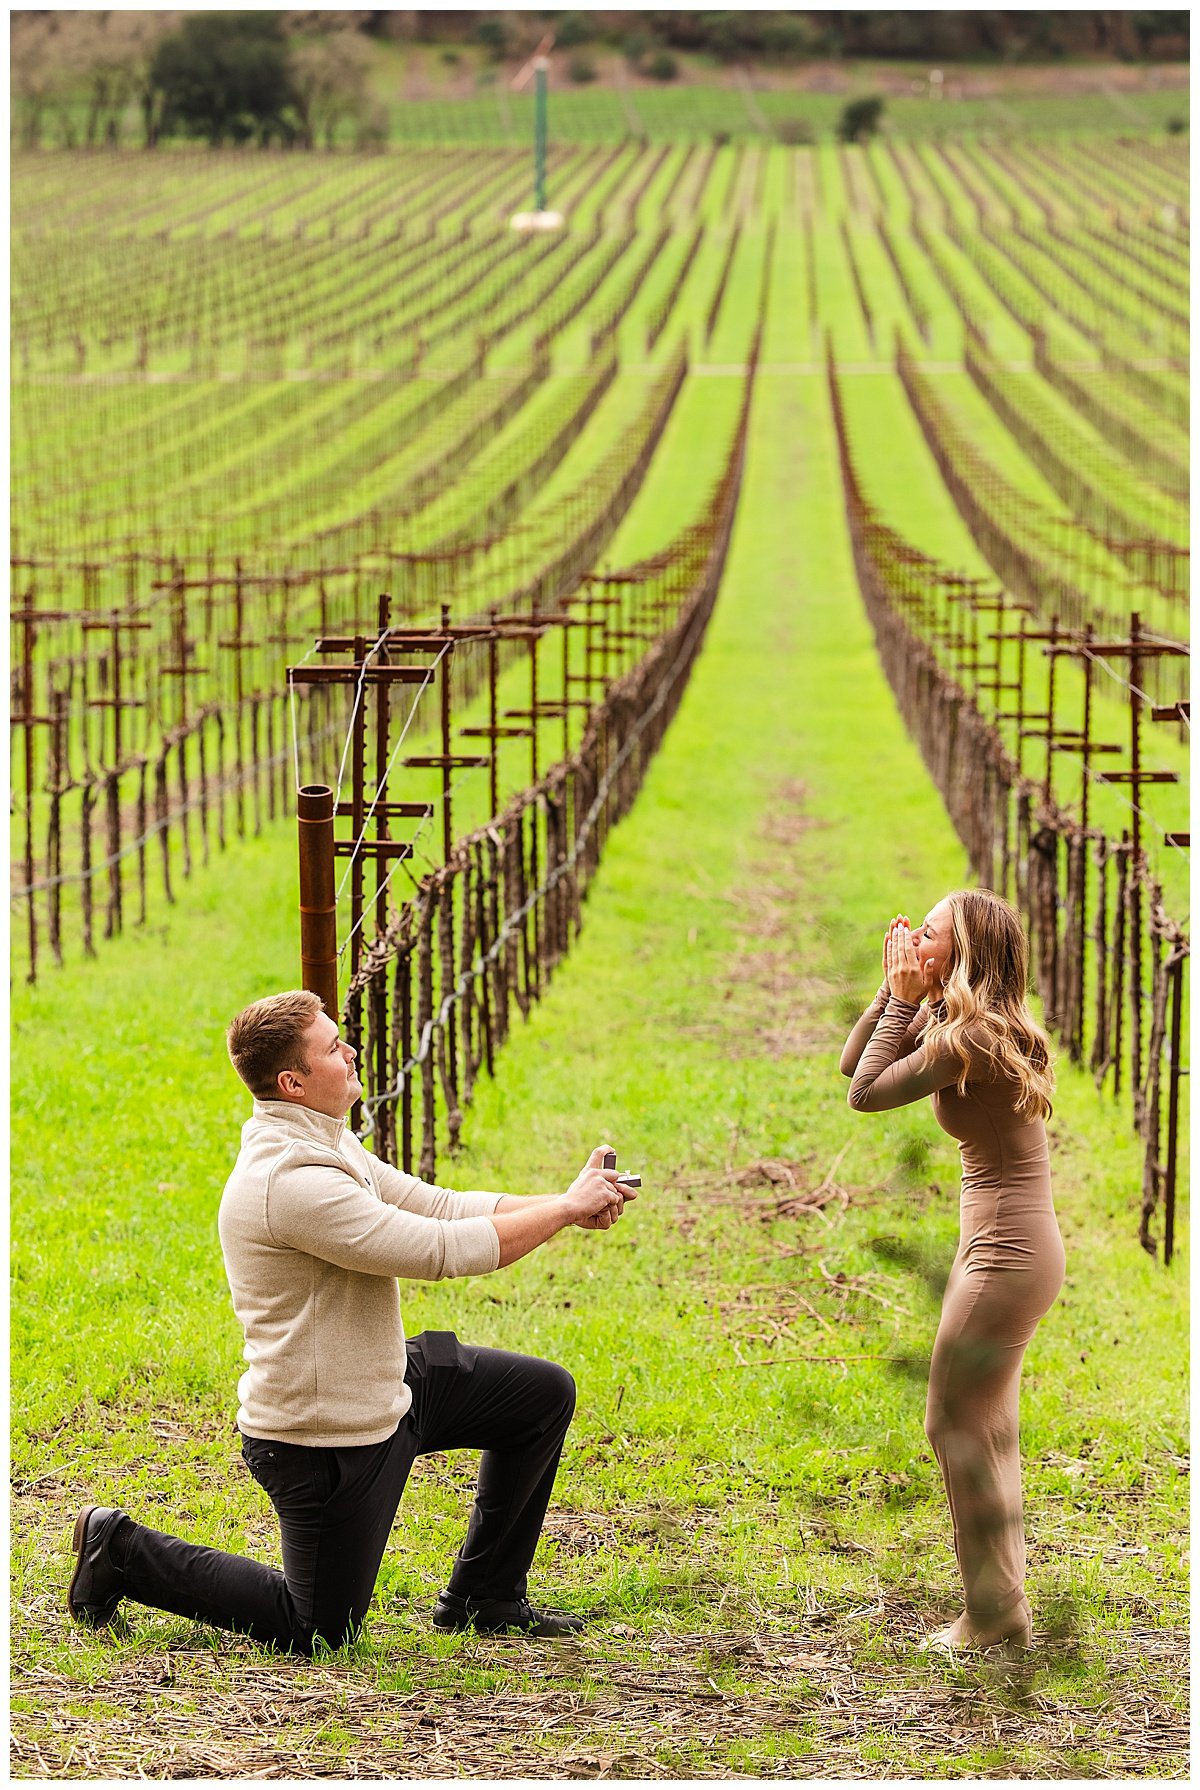 Engagement Photos at Stags' Leap Winery in Napa California_0004.jpg